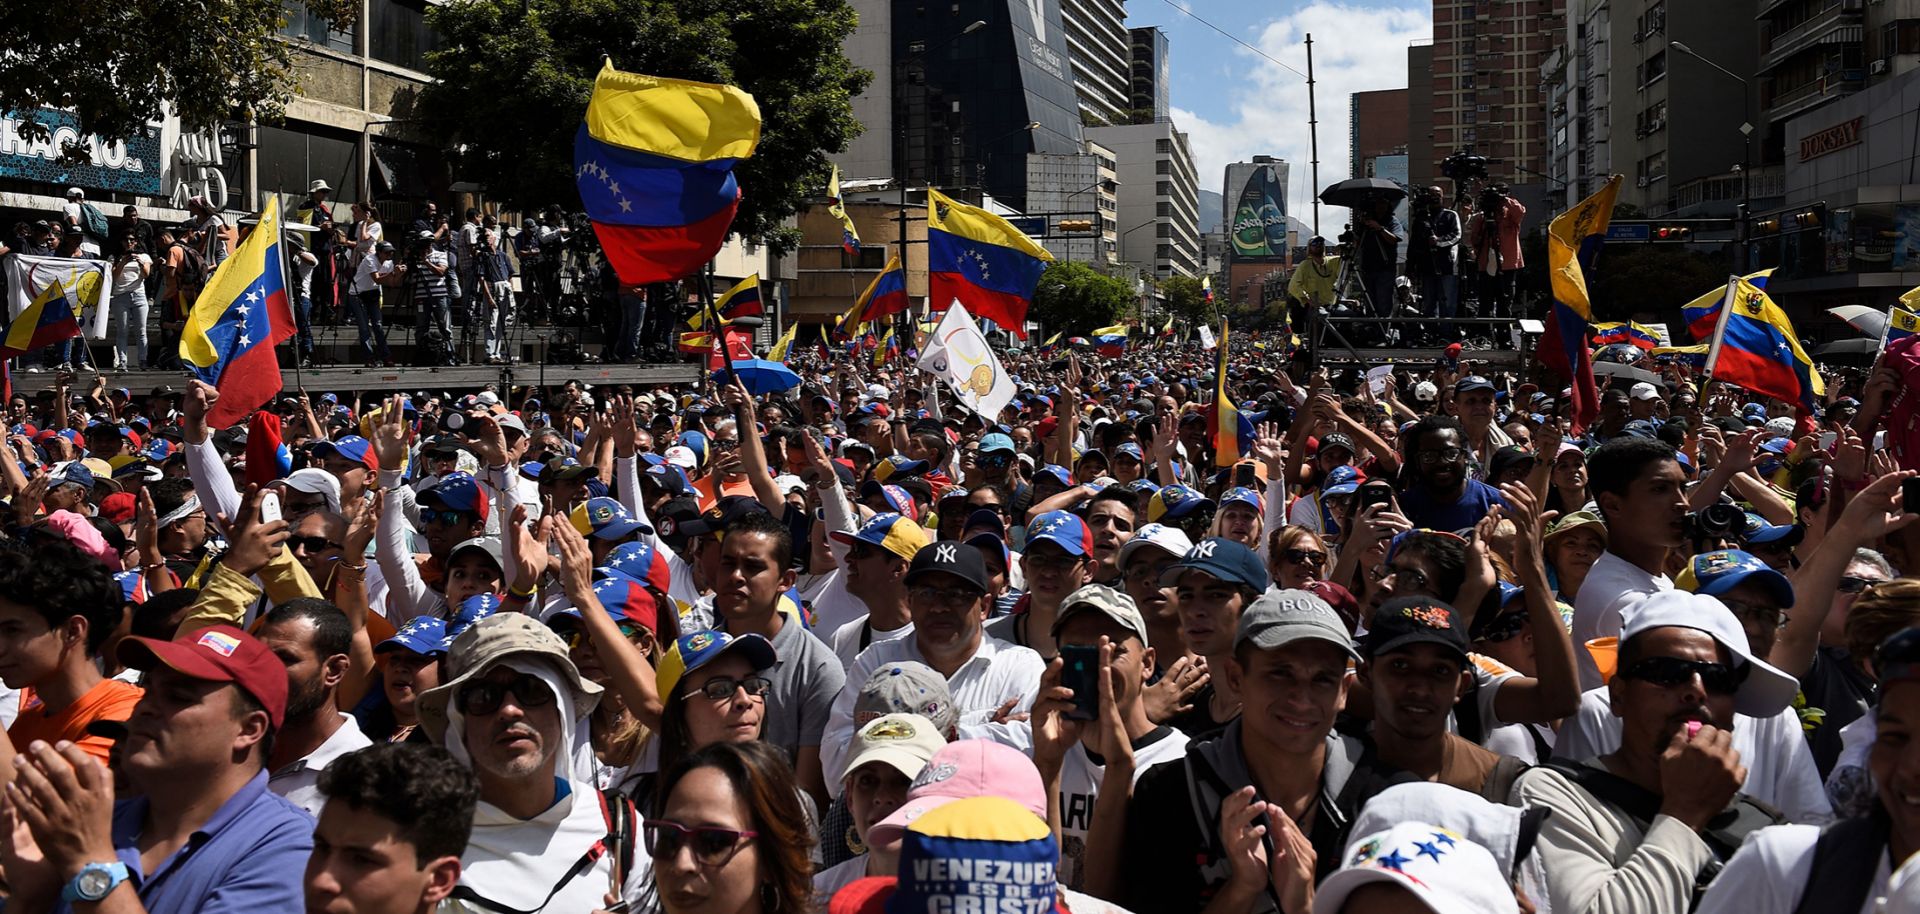 Supporters of Venezuelan opposition leader Juan Guaido take part in a rally to let in U.S. humanitarian aid, in Caracas on Feb. 12, 2019.